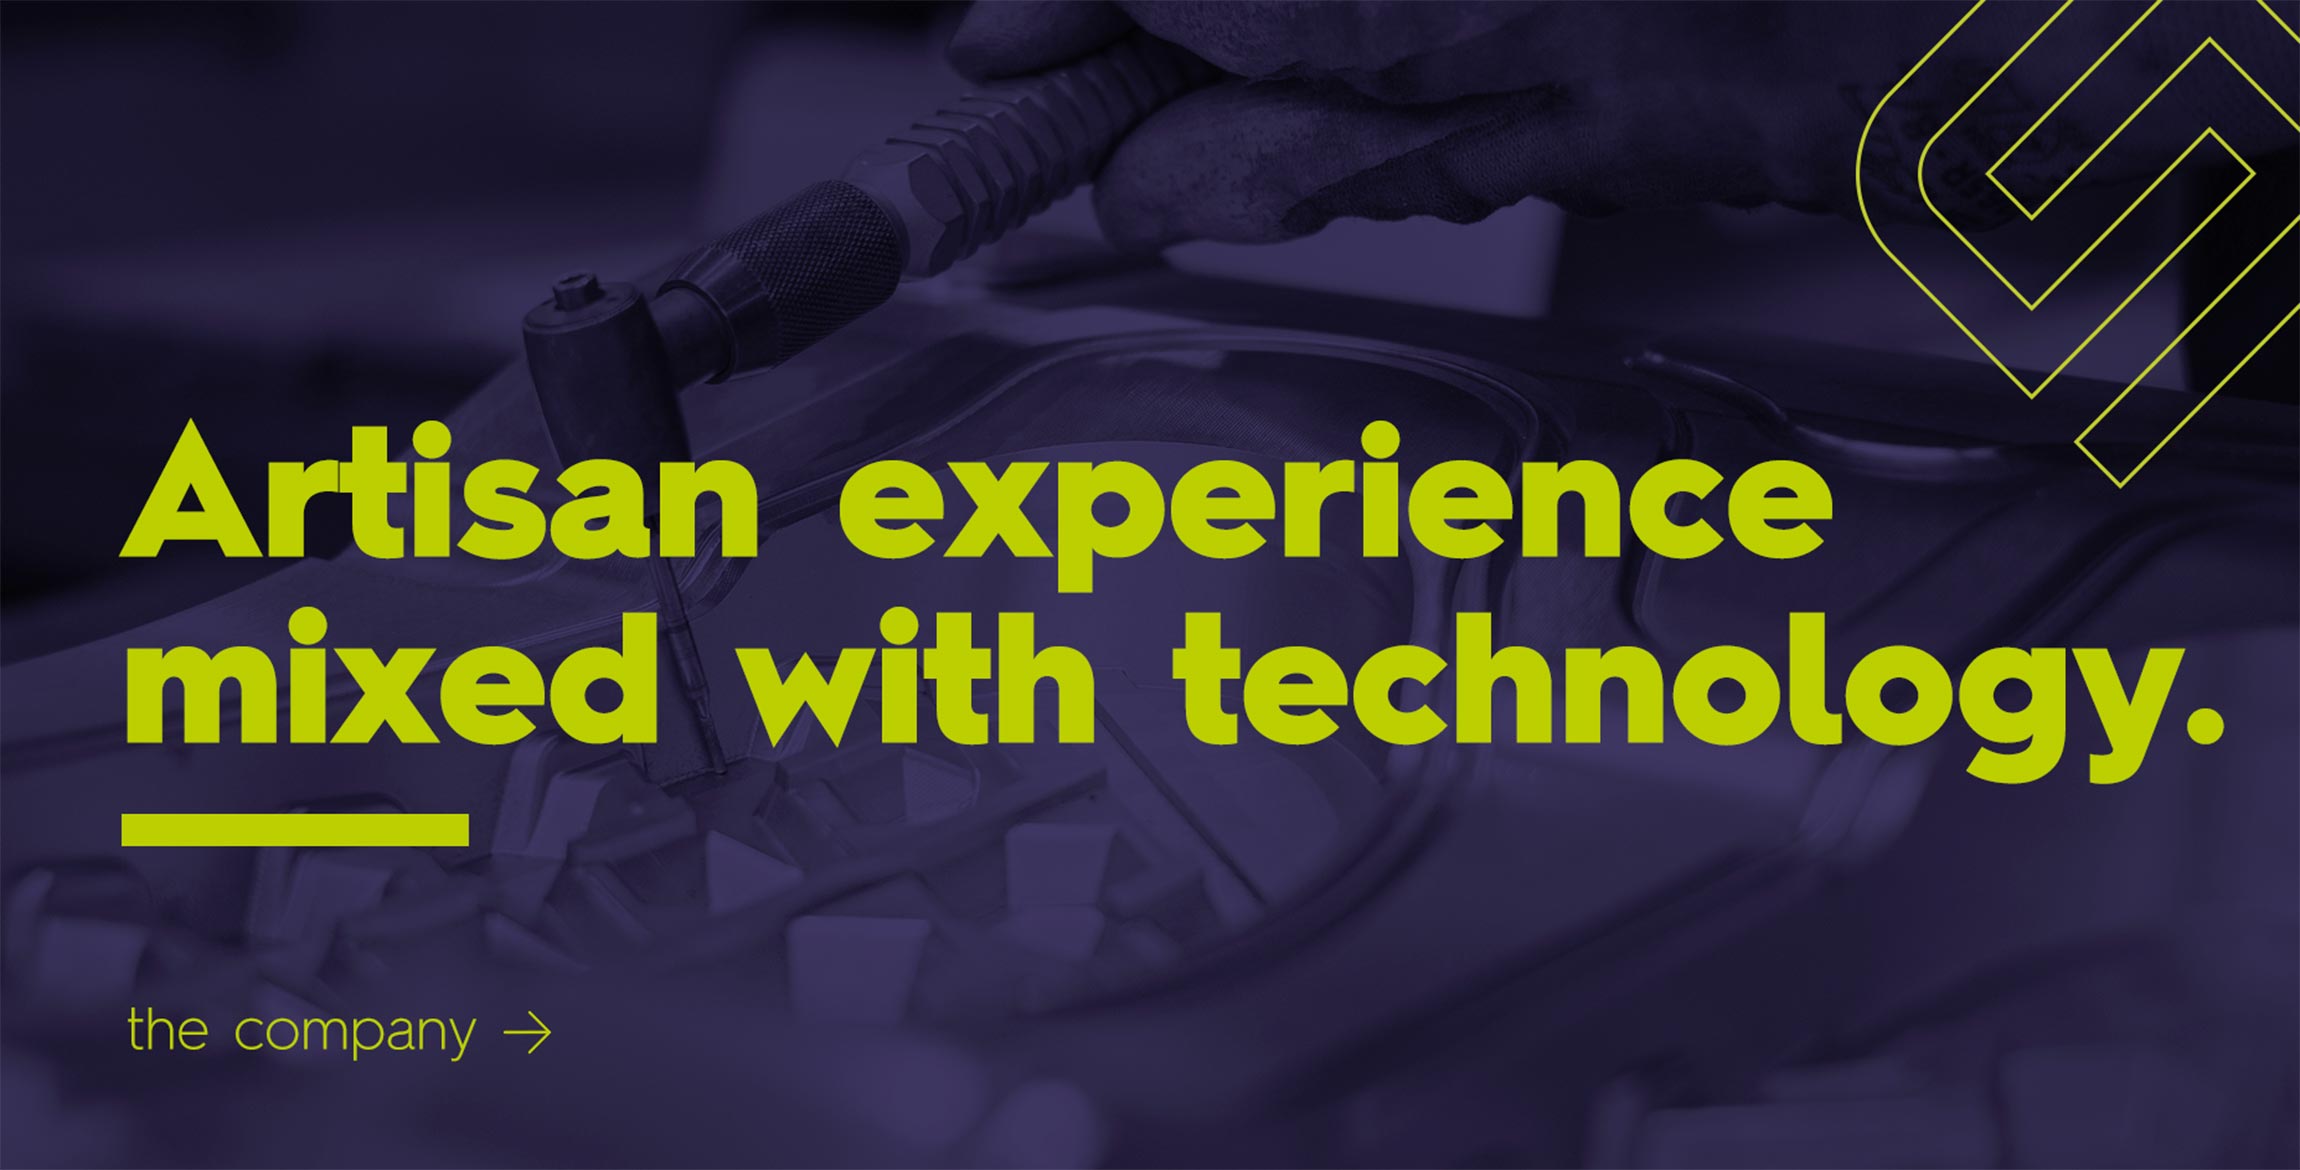 ARTISAN EXPERIENCE MIXED WITH TECHNOLOGY